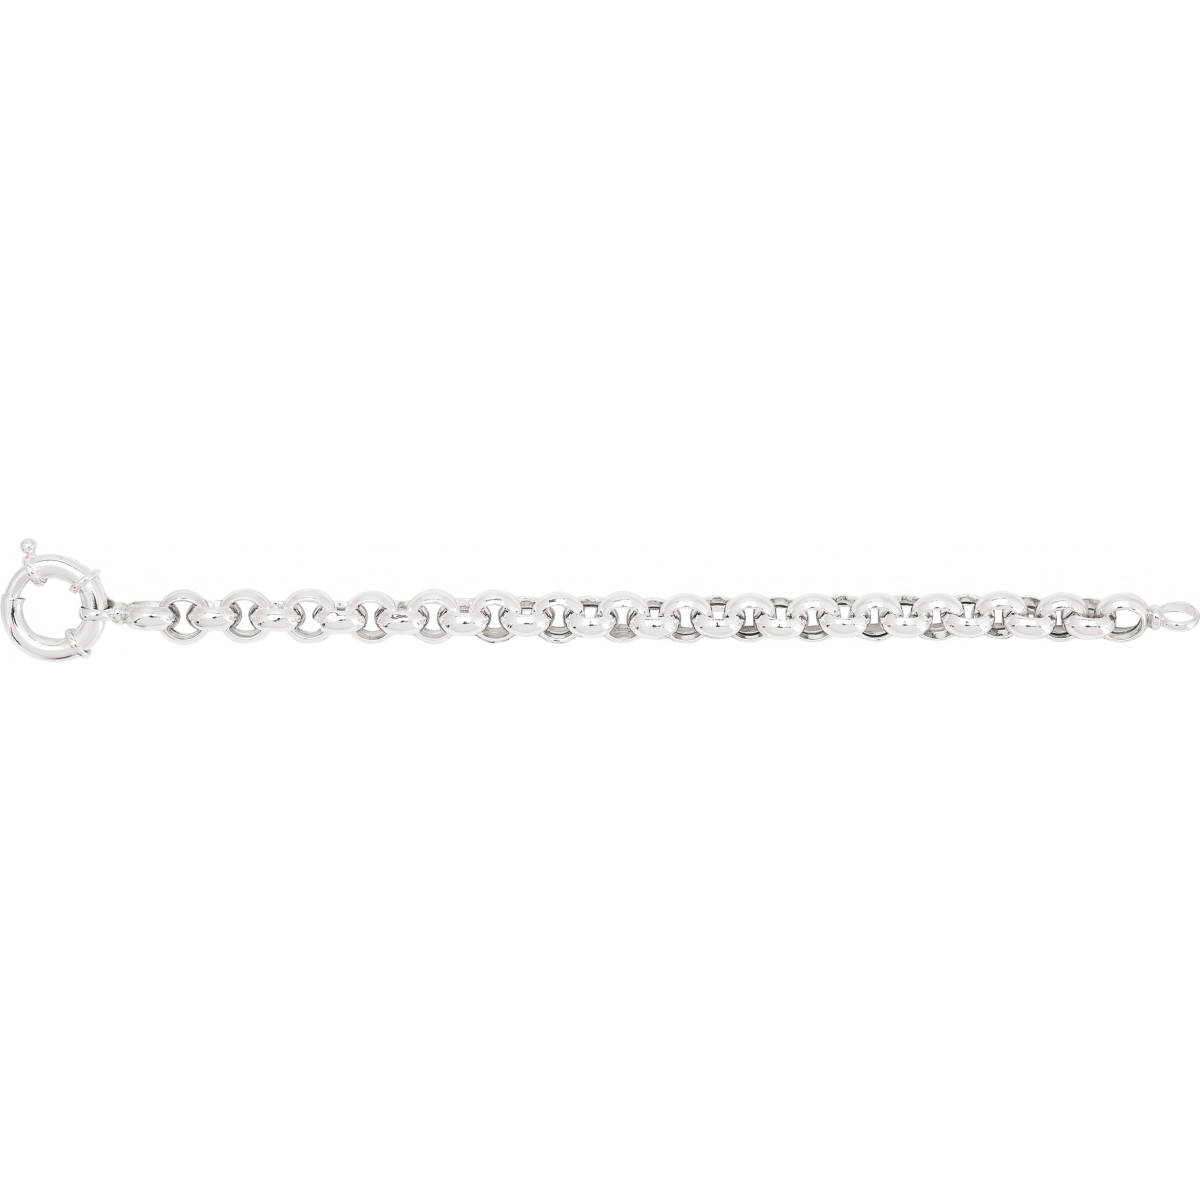 Collier ag925 Lua Blanca  354415J - Taille 50